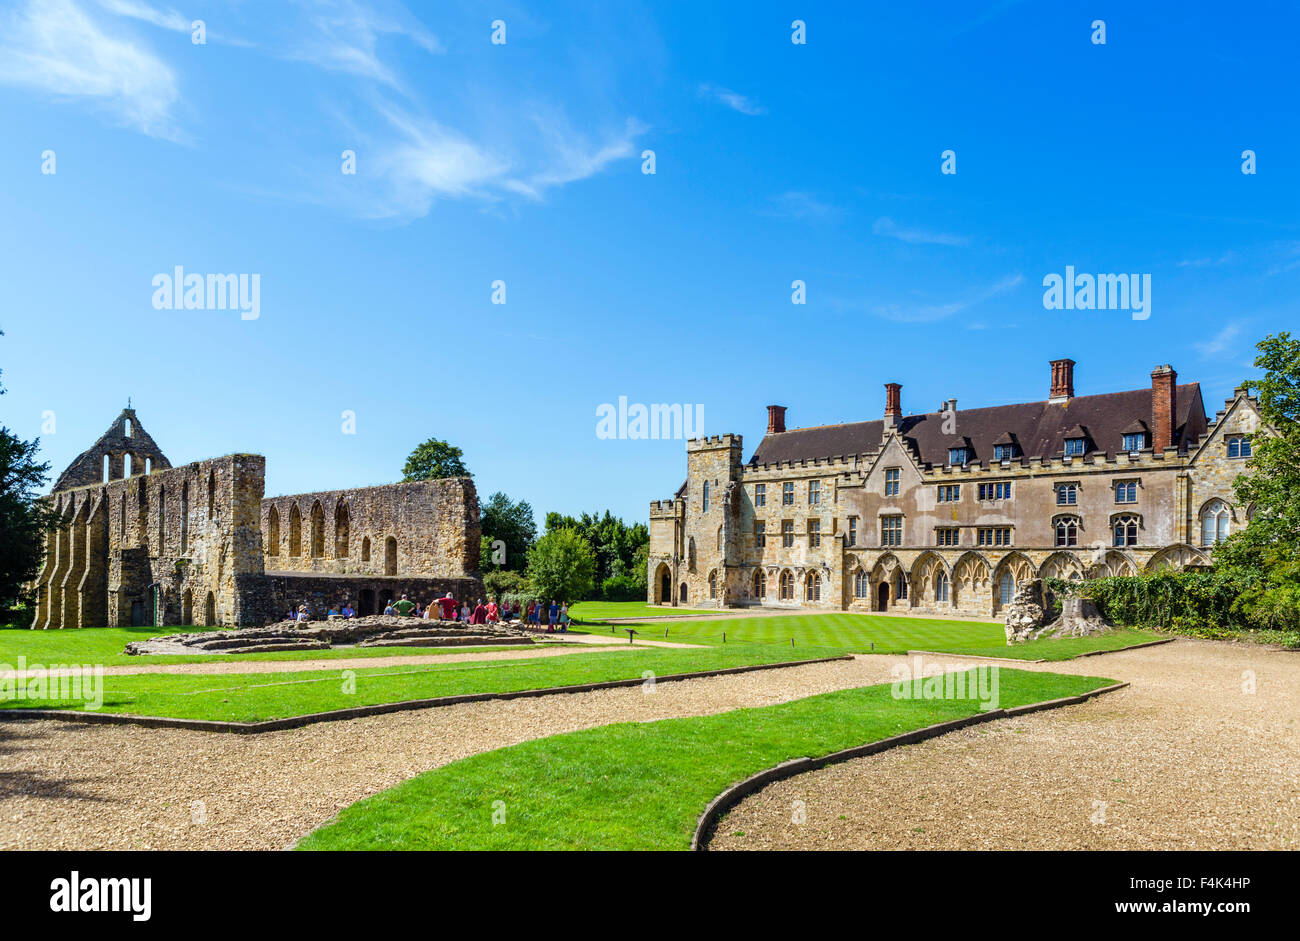 The Dormitory Range and Abbot's Great Hall at Battle Abbey, 1066 Battle of Hastings Abbey & Battlefield, East Sussex England, UK Stock Photo